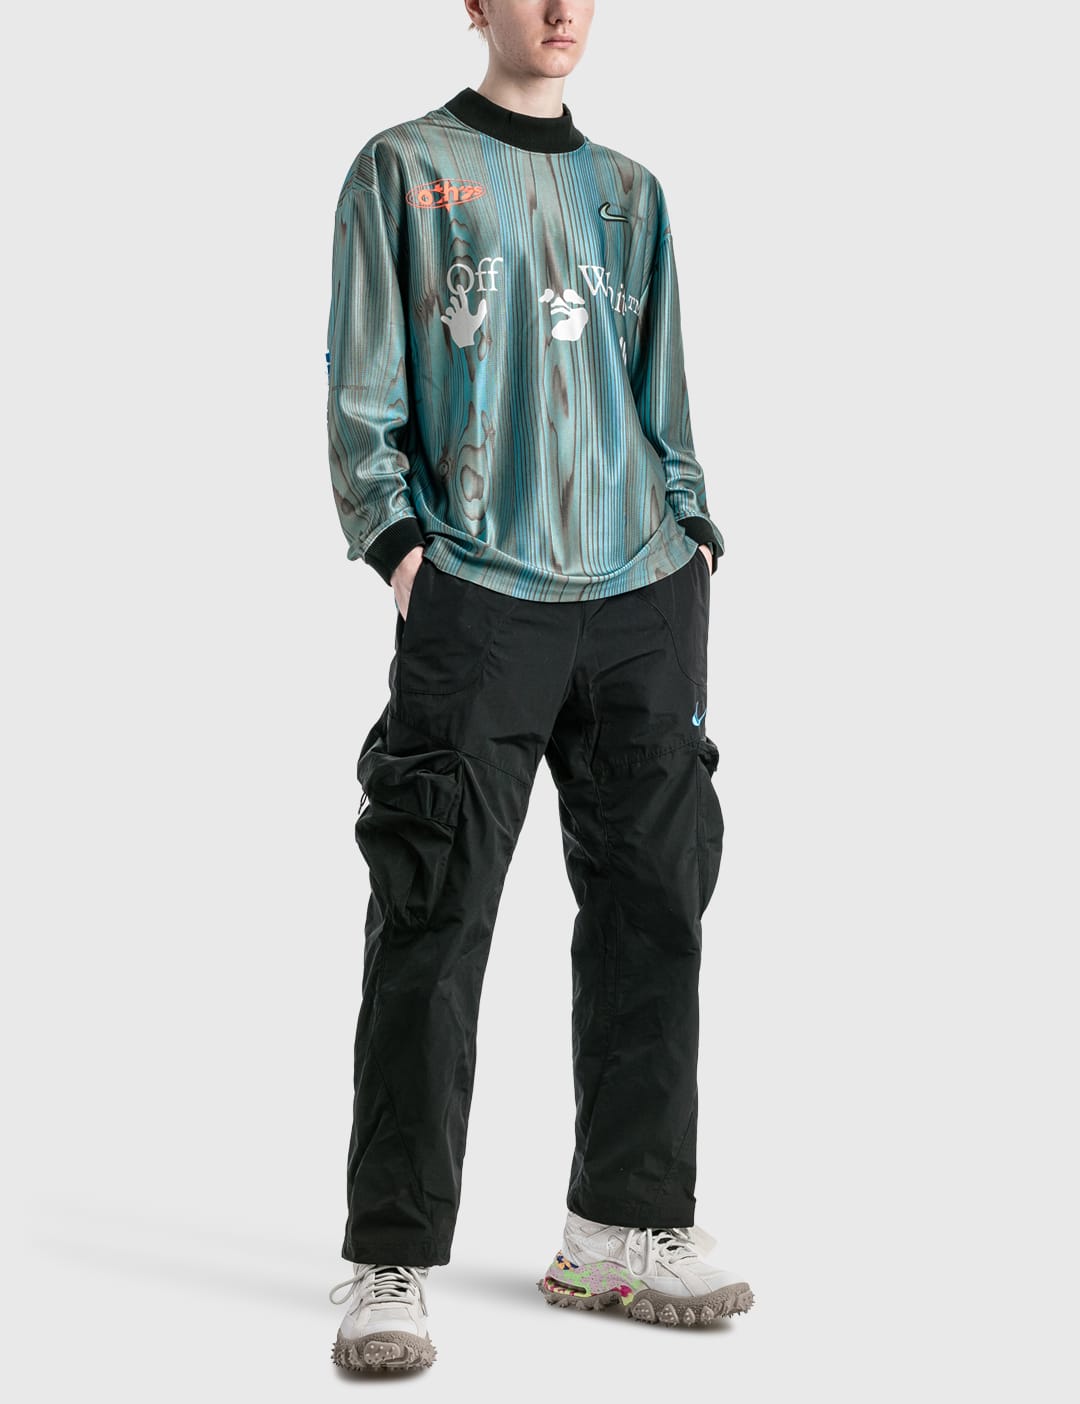 Nike - Nike x Off-White™ NRG Jersey | HBX - Globally Curated ...